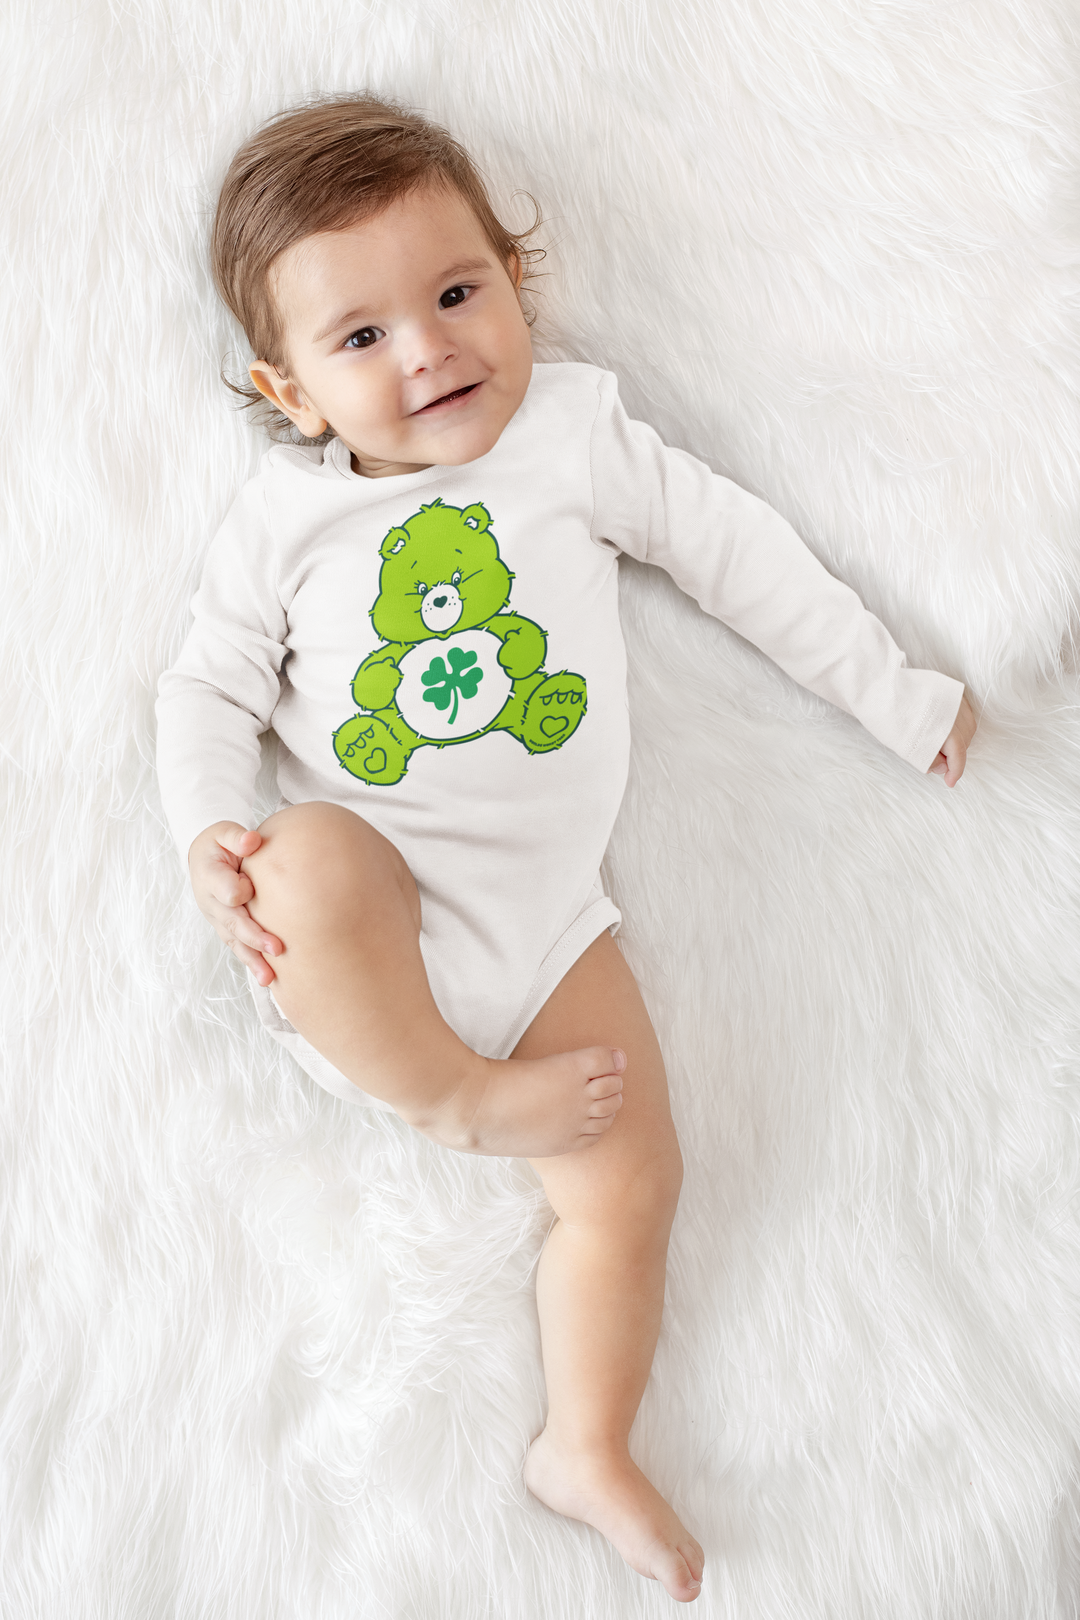 A Lucky Bear Onesie for infants, featuring a baby lying on a white blanket with a green teddy bear and clover. Made of soft cotton with plastic snaps for easy changing. From Worlds Worst Tees.